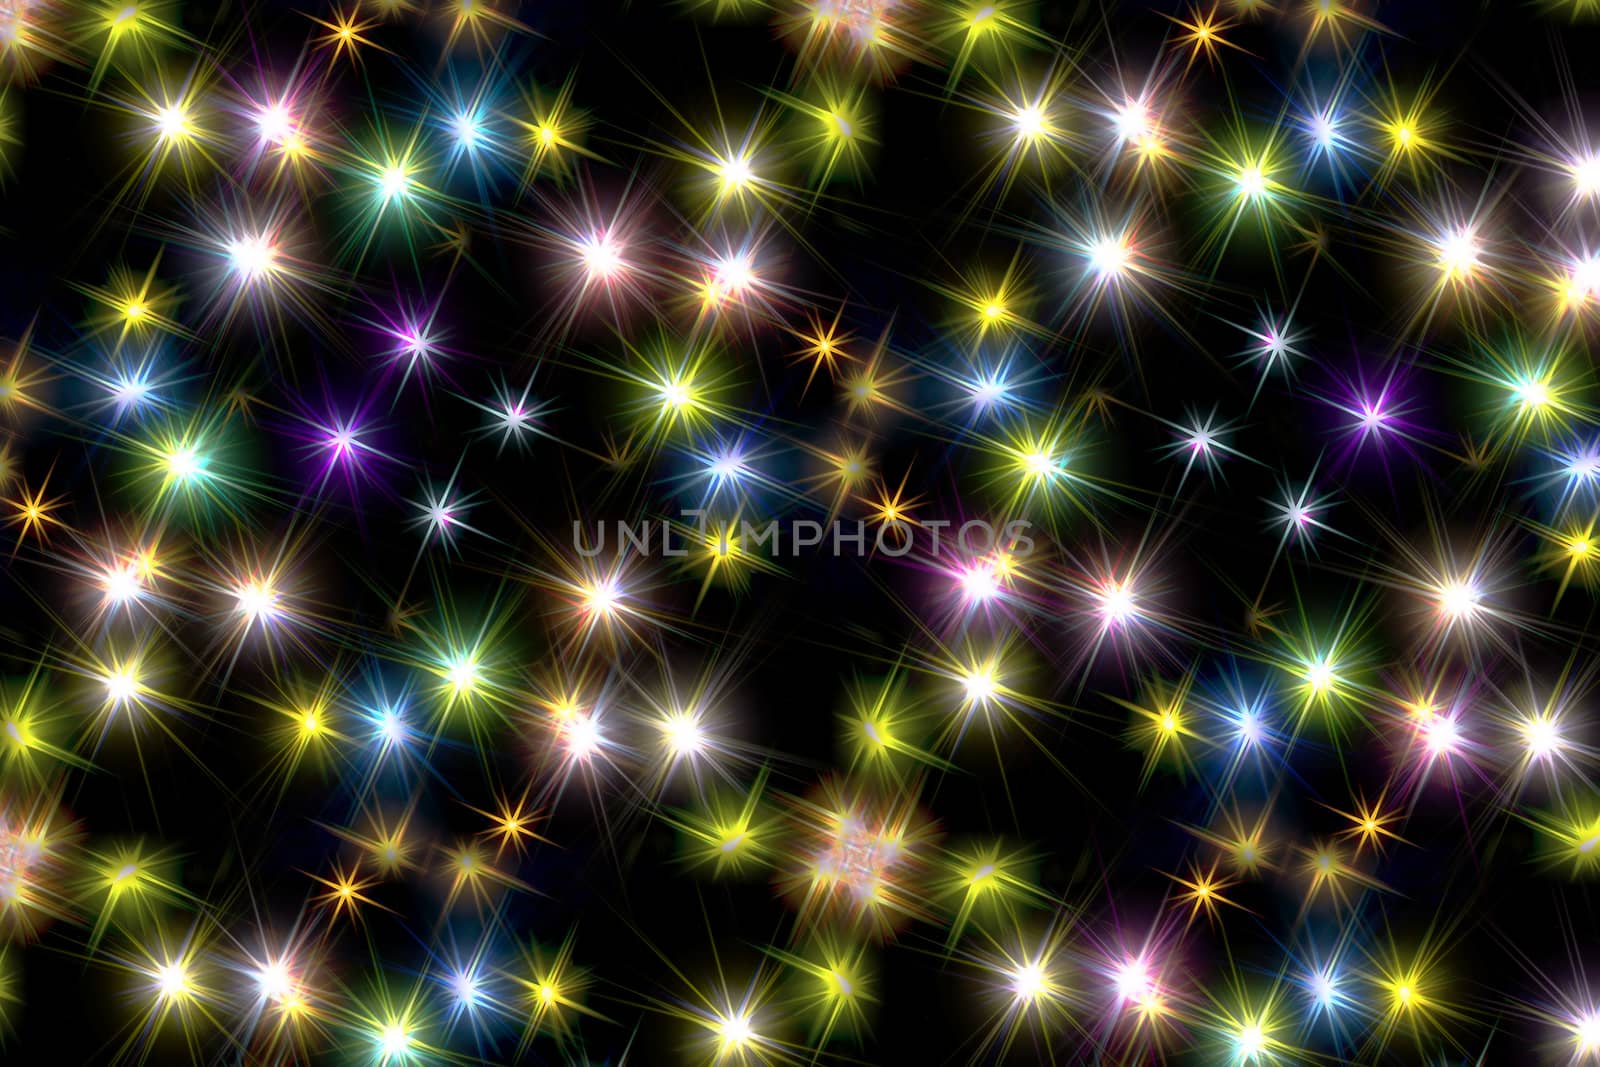 
Abstraction in the form of a multicolored shining stars on a black background